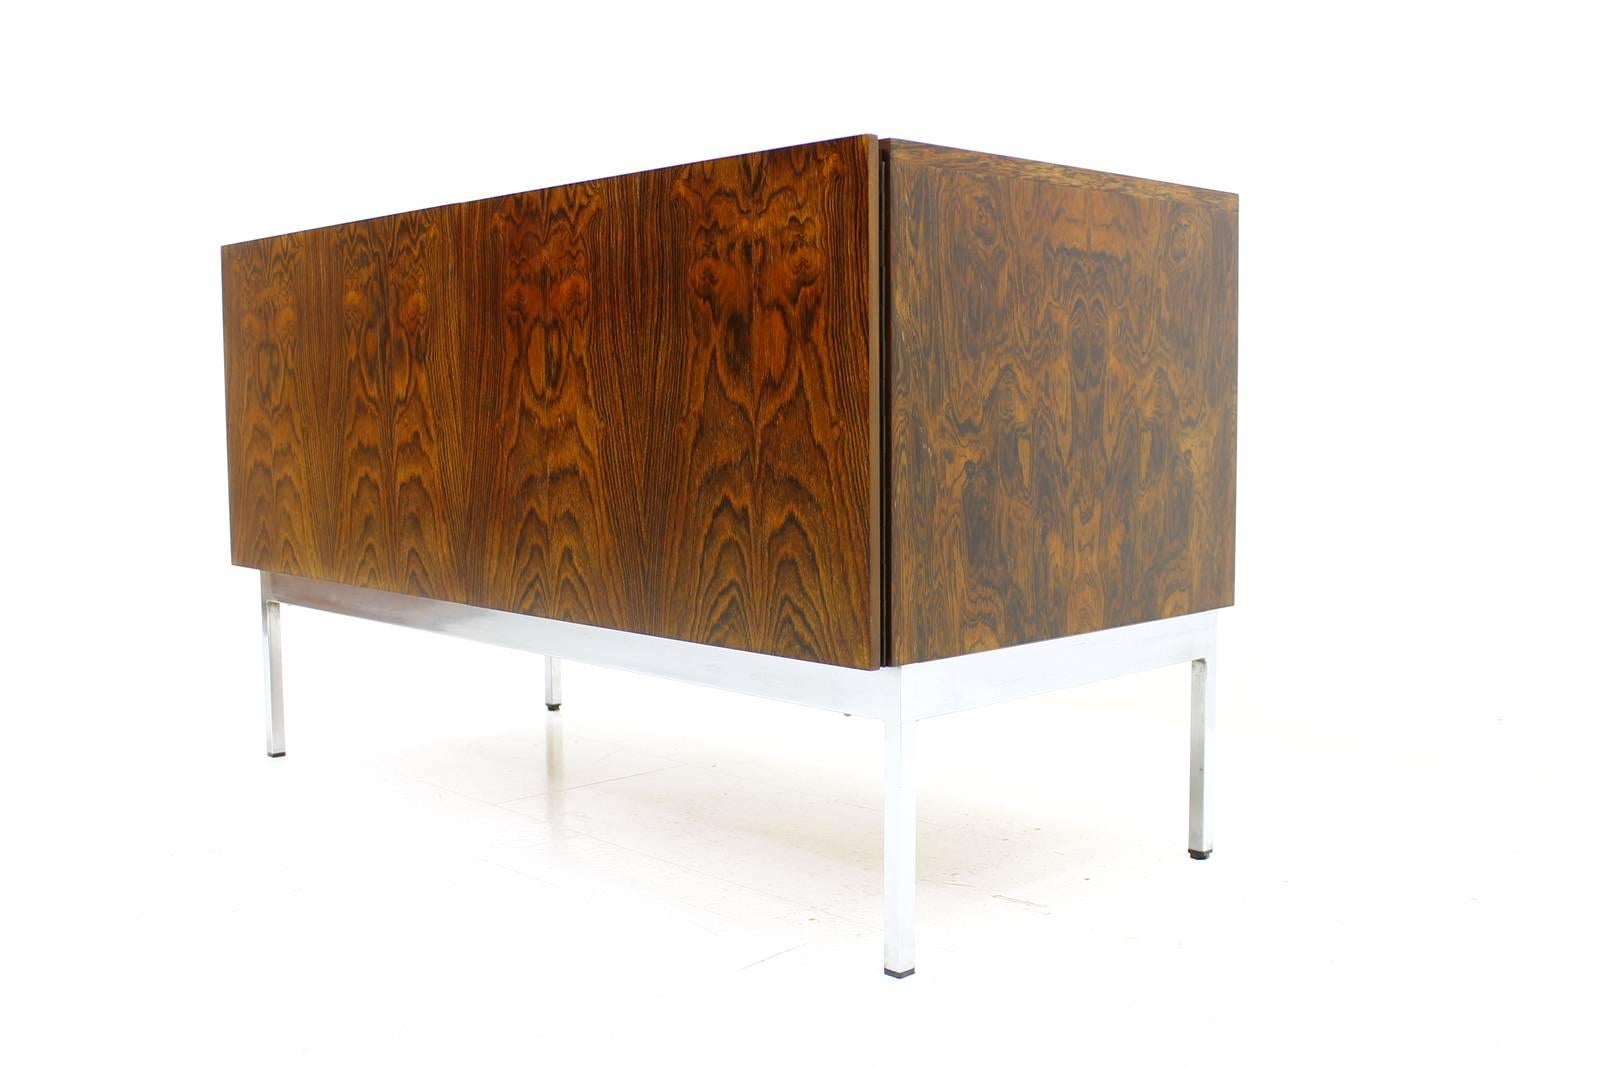 Rare Small Rosewood Sideboard by Dieter Wäckerlin, Behr 1958.
Perfect restored condition.

Worldwide shipping.